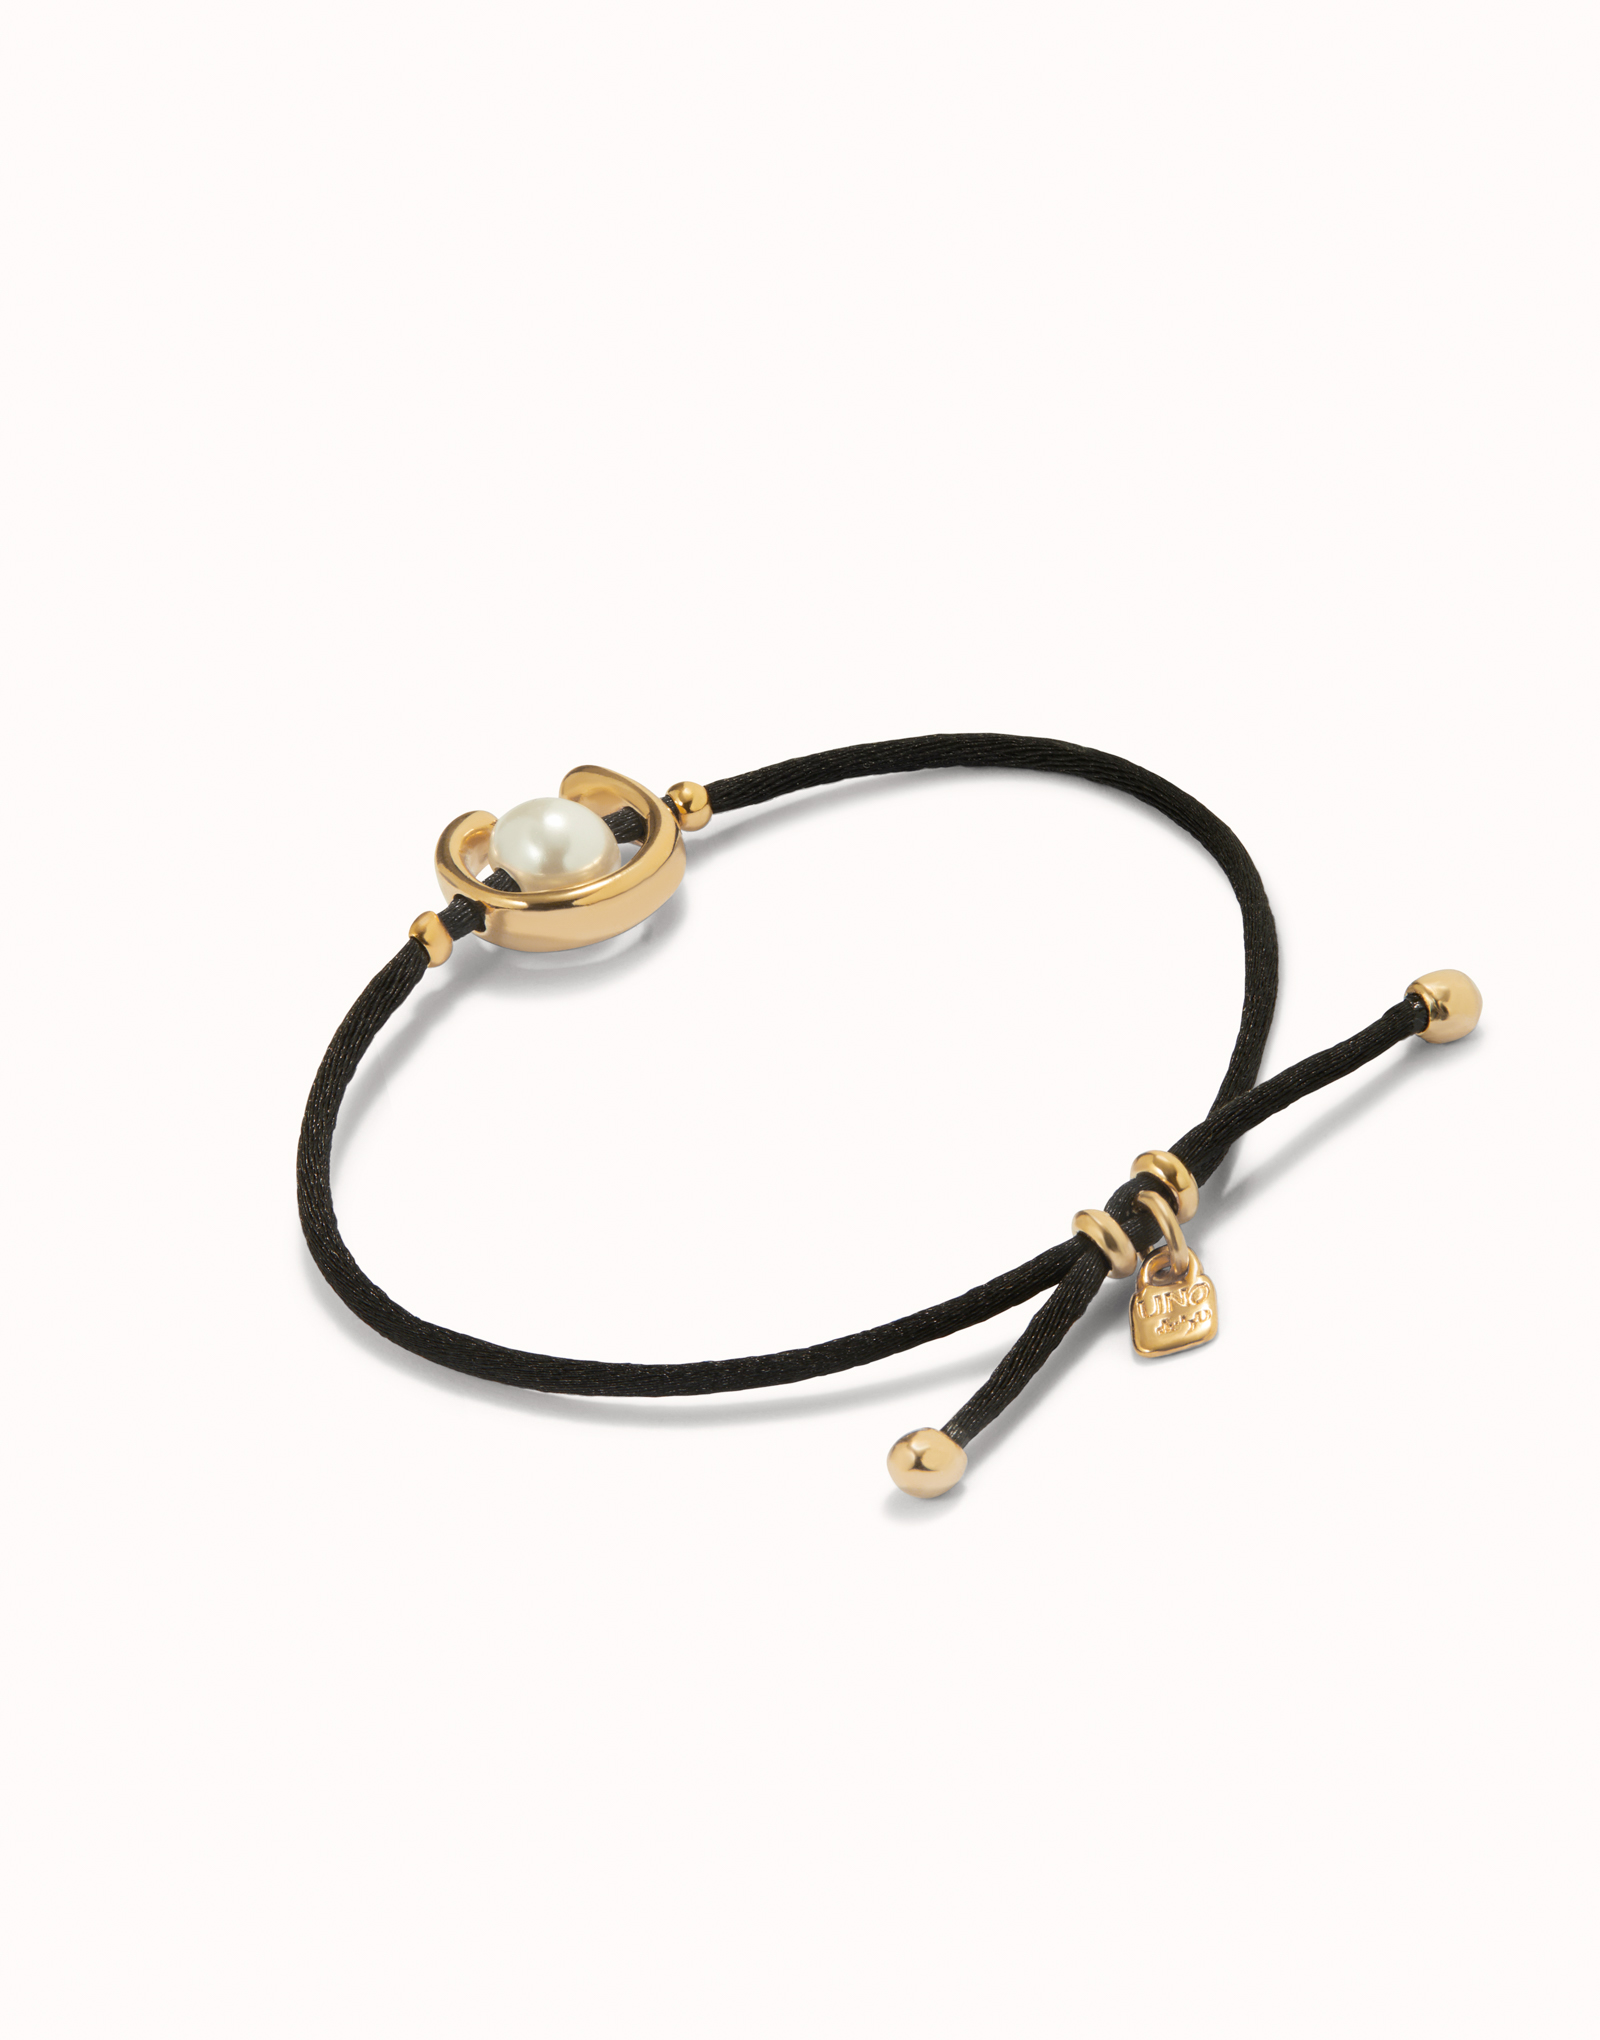 18K gold-plated black thread bracelet with shell pearl accessory., Golden, large image number null